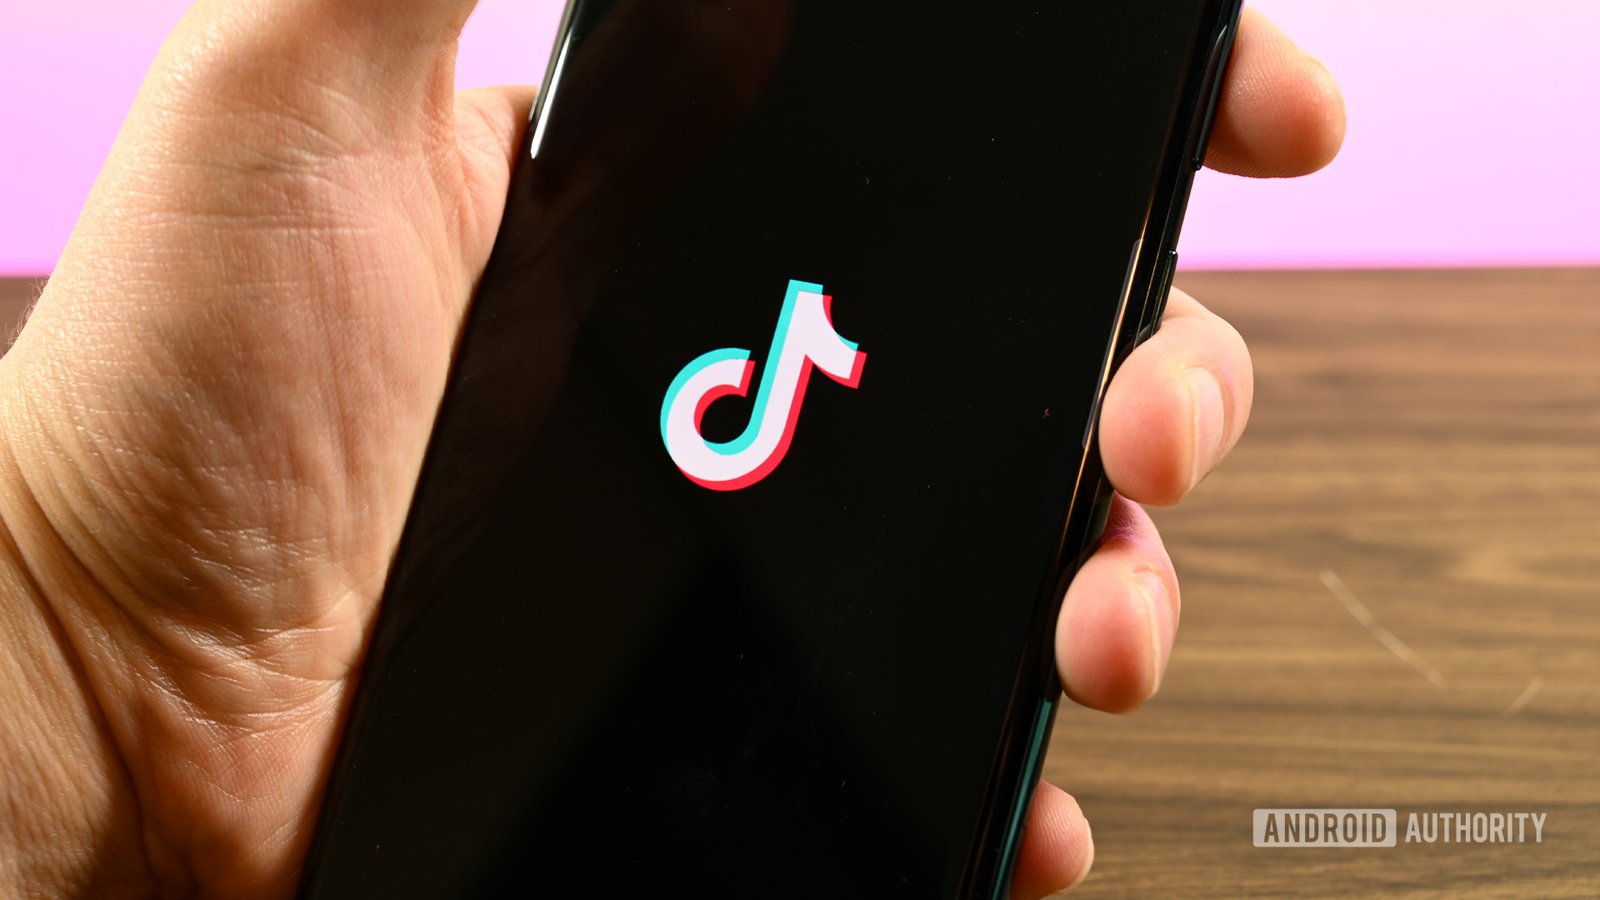 The US will ban TikTok if it doesn’t disconnect from China